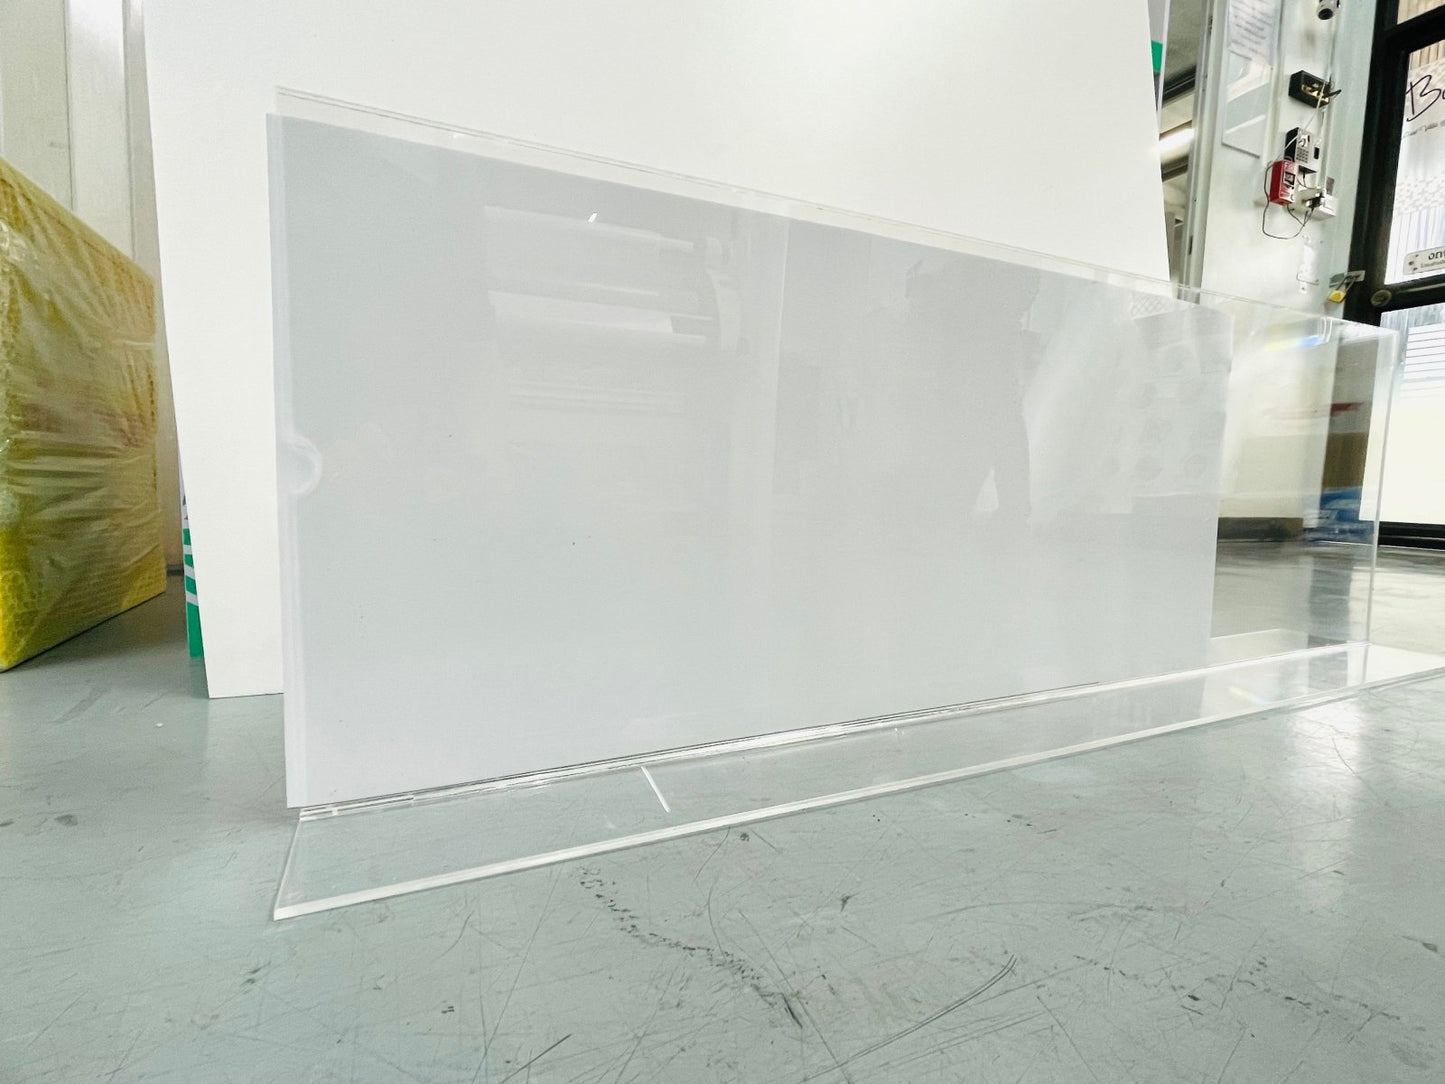 Acrylic frame for inserting documents